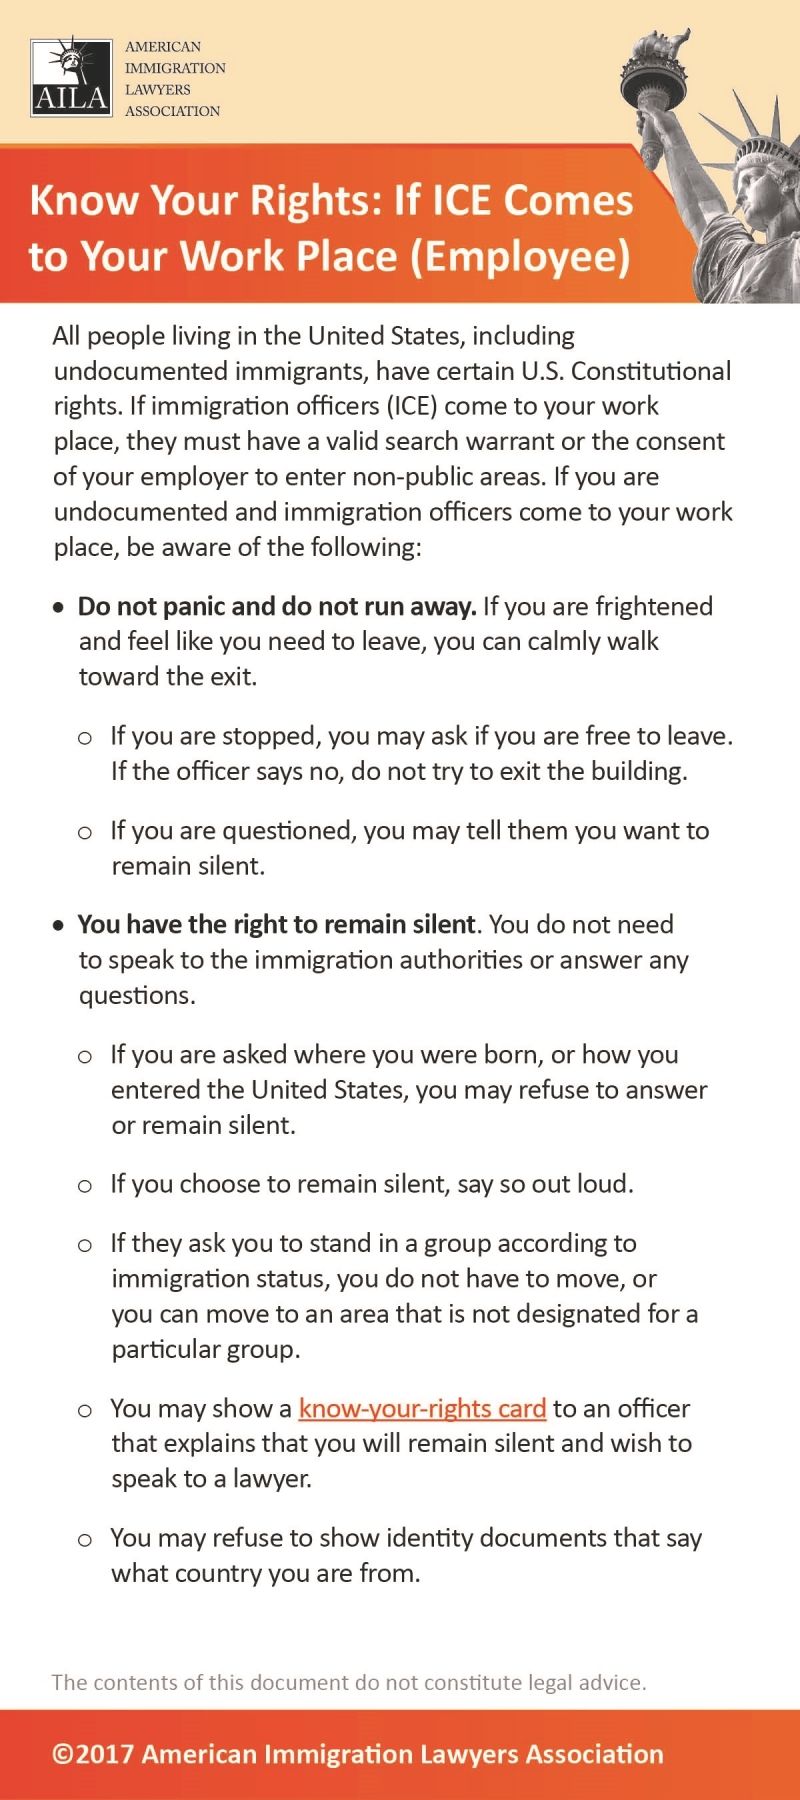 Know Your Rights: If Ice Comes to Your Work Place (Employee)